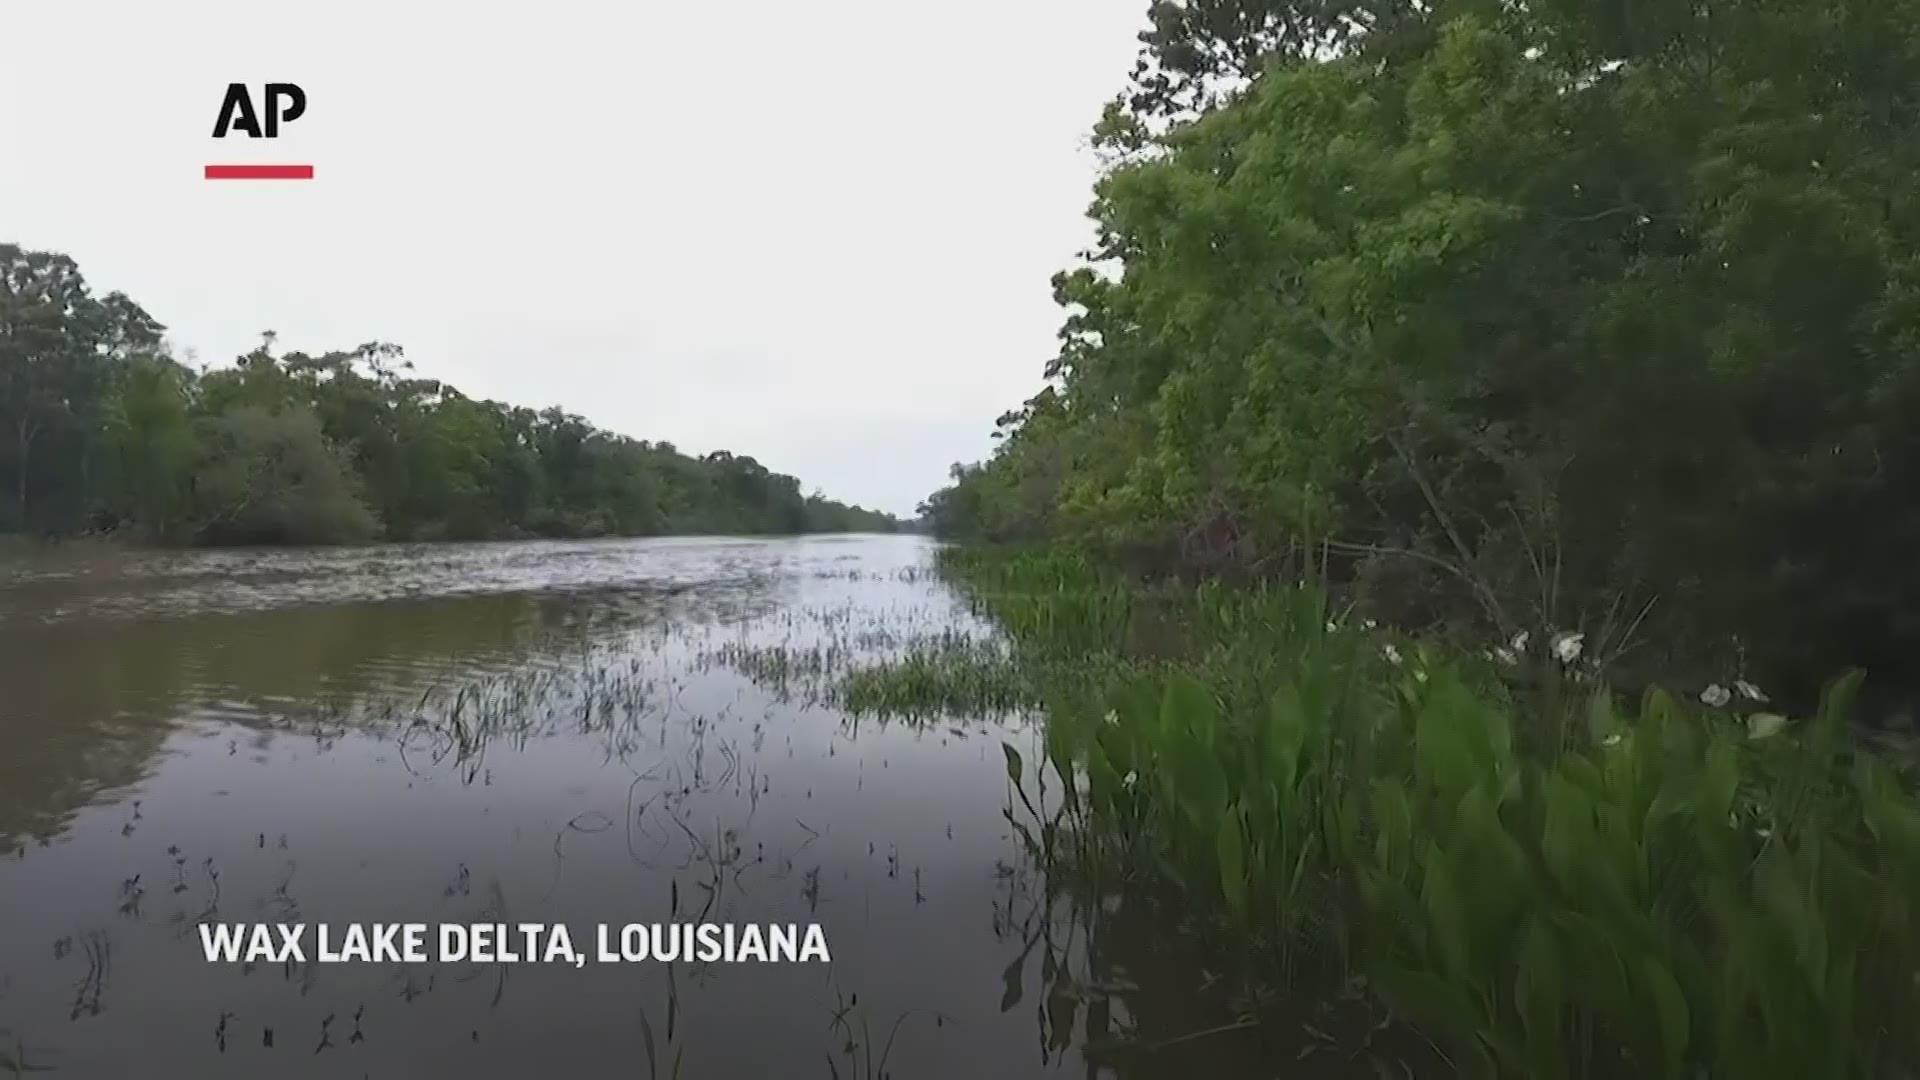 NASA is using high-tech airborne systems along with boats and mud-slogging work on islands for a $15 million, five-year study of the Mississippi River delta system.